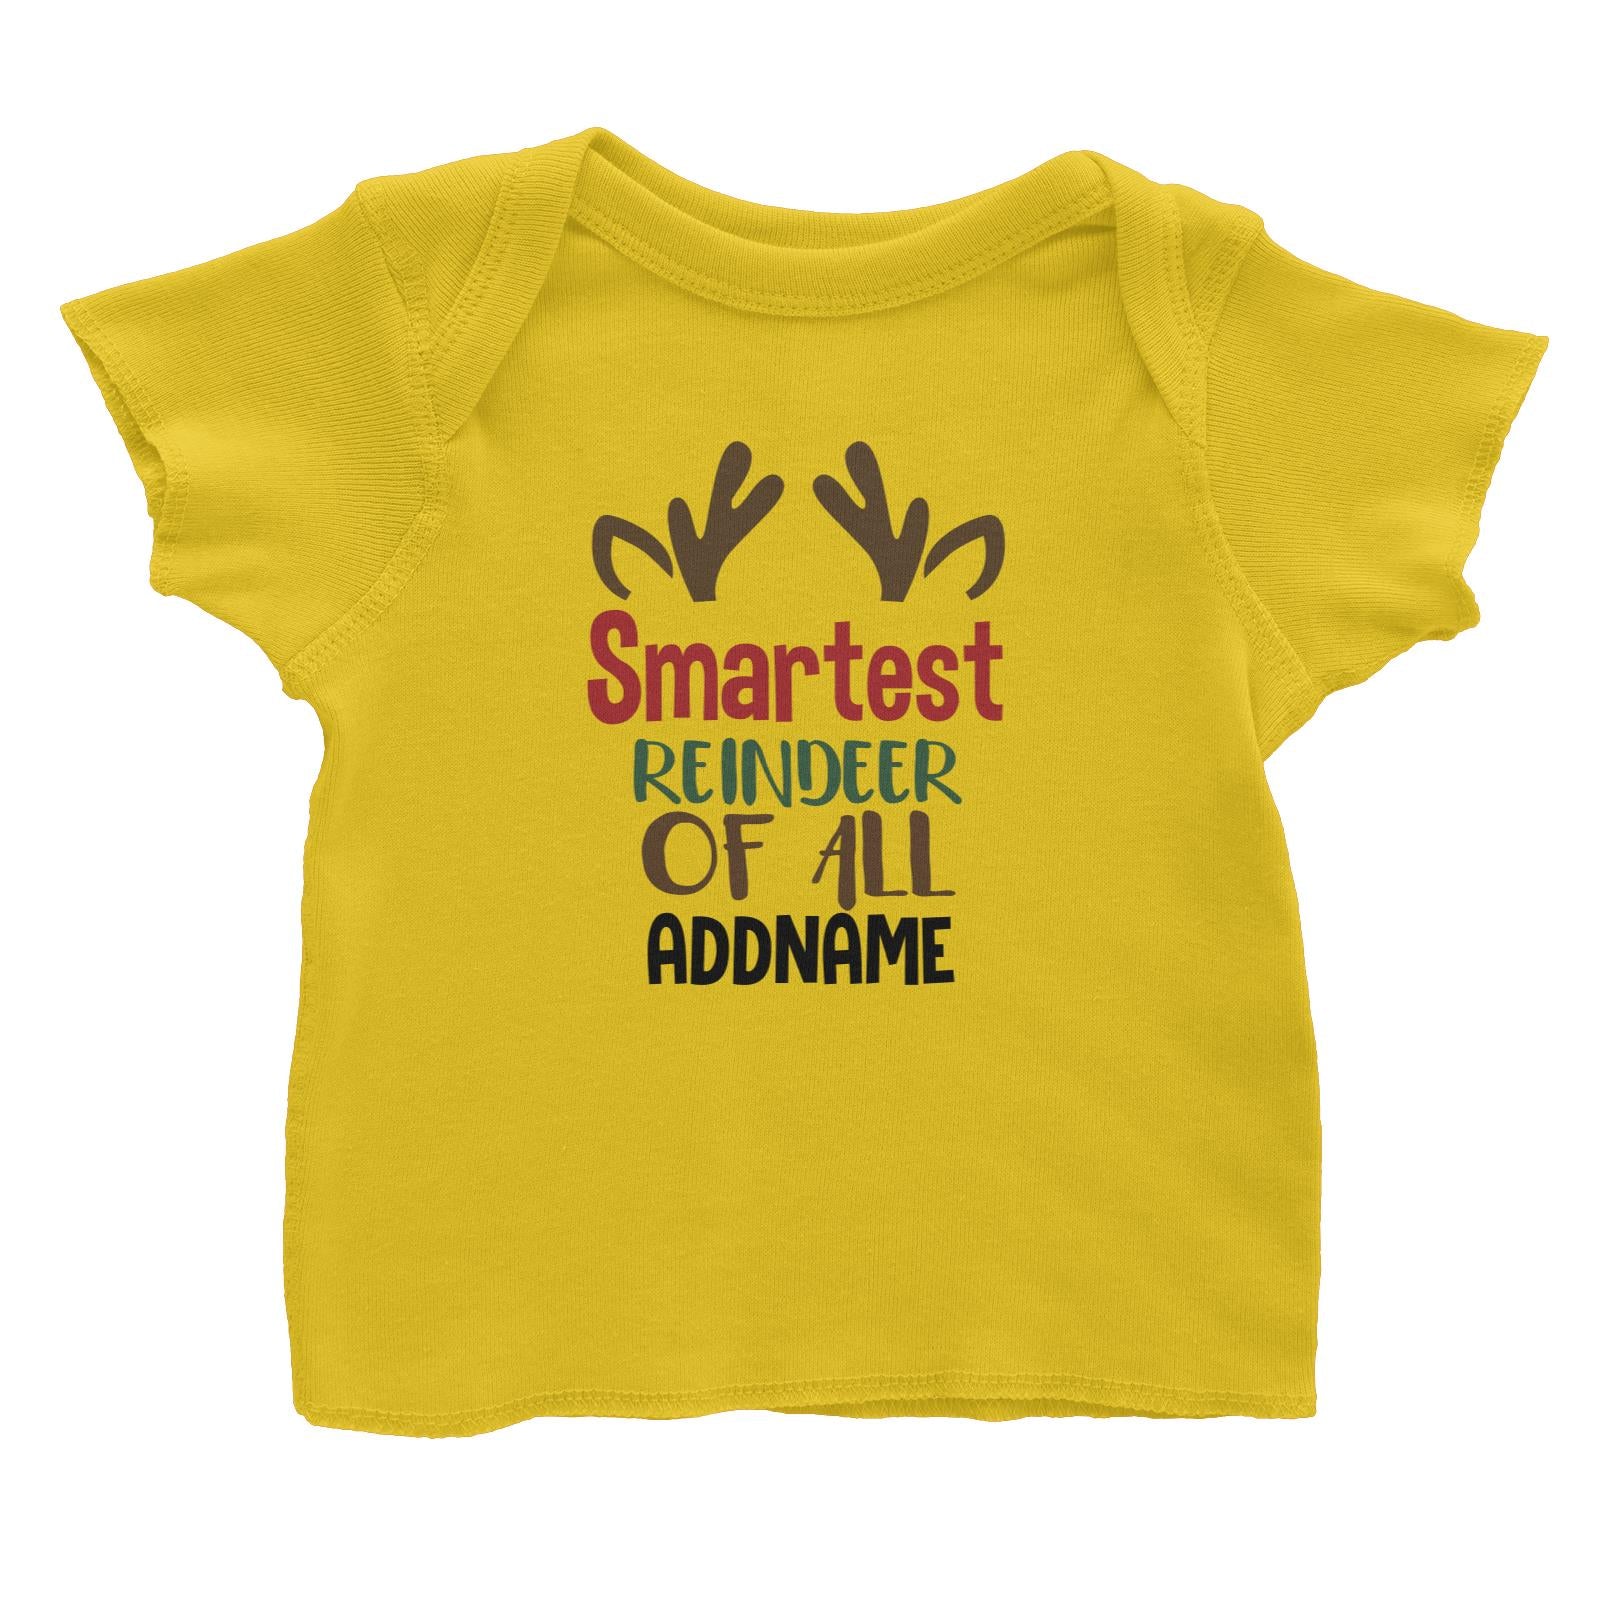 Xmas Smartest Reindeer of All Baby T-Shirt